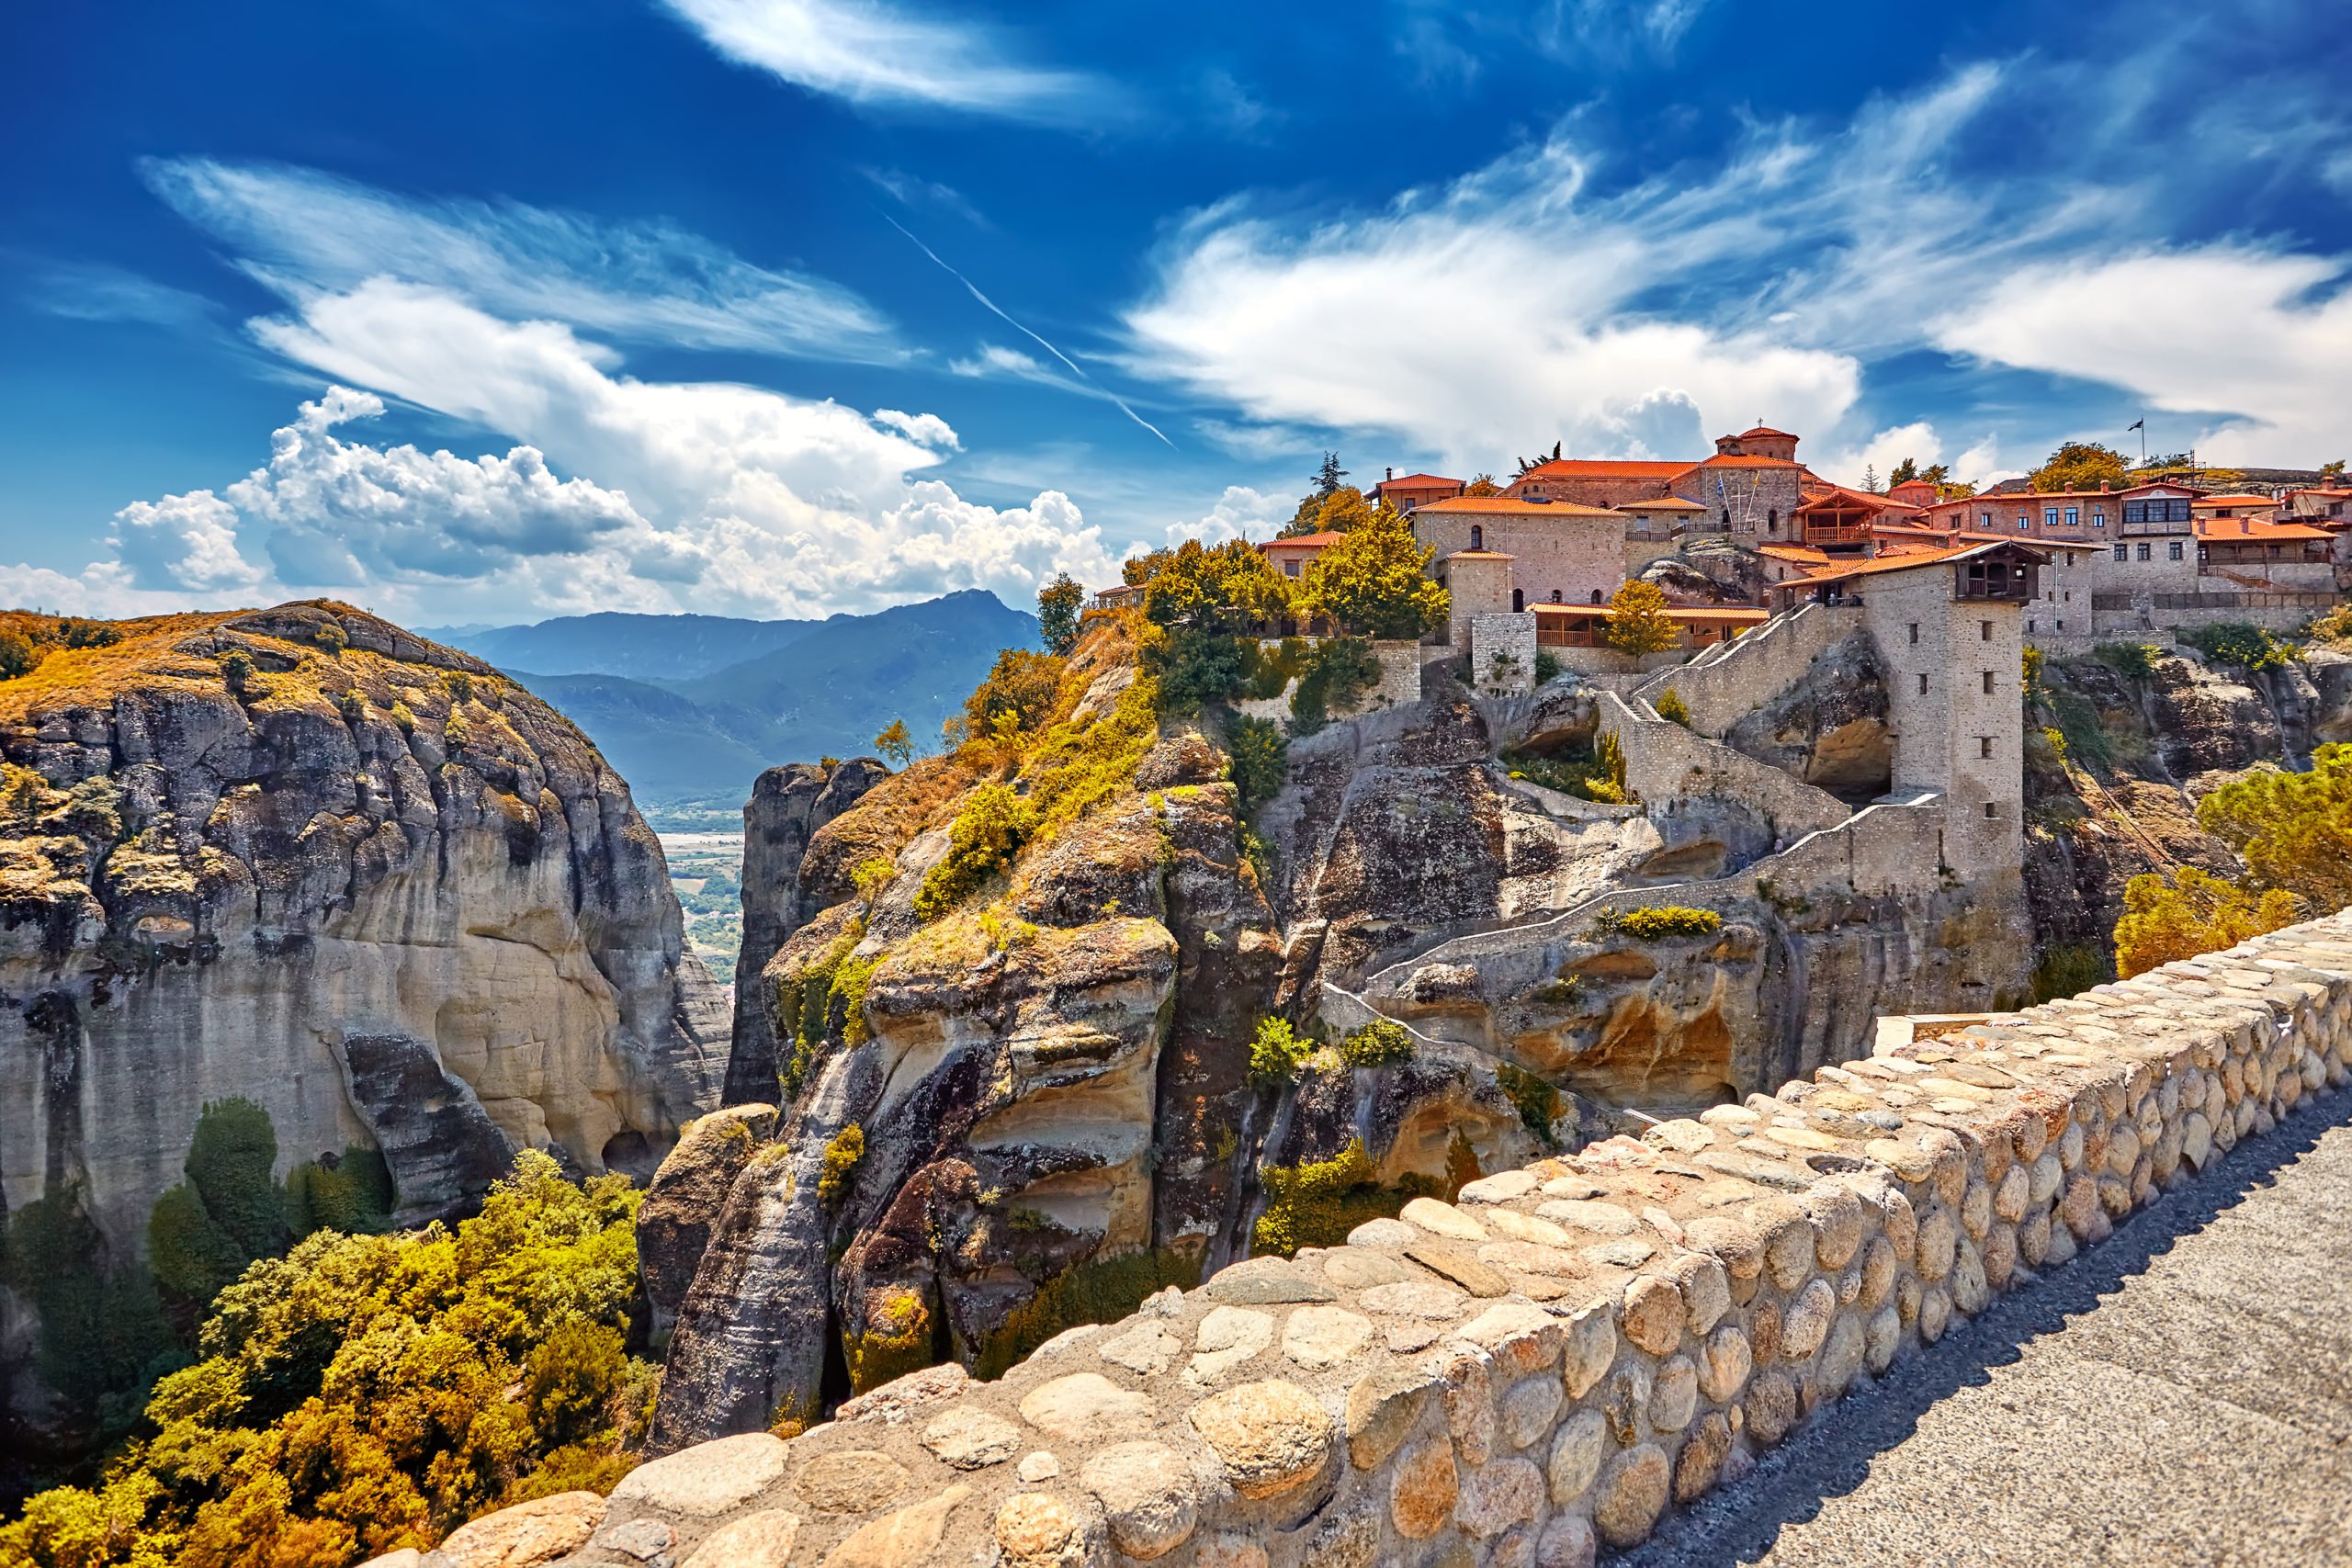 Don't Miss A Visit Of The Great Monastery Of Varlaam On The Meteora Tour From Athens Or Thessaloniki By Train